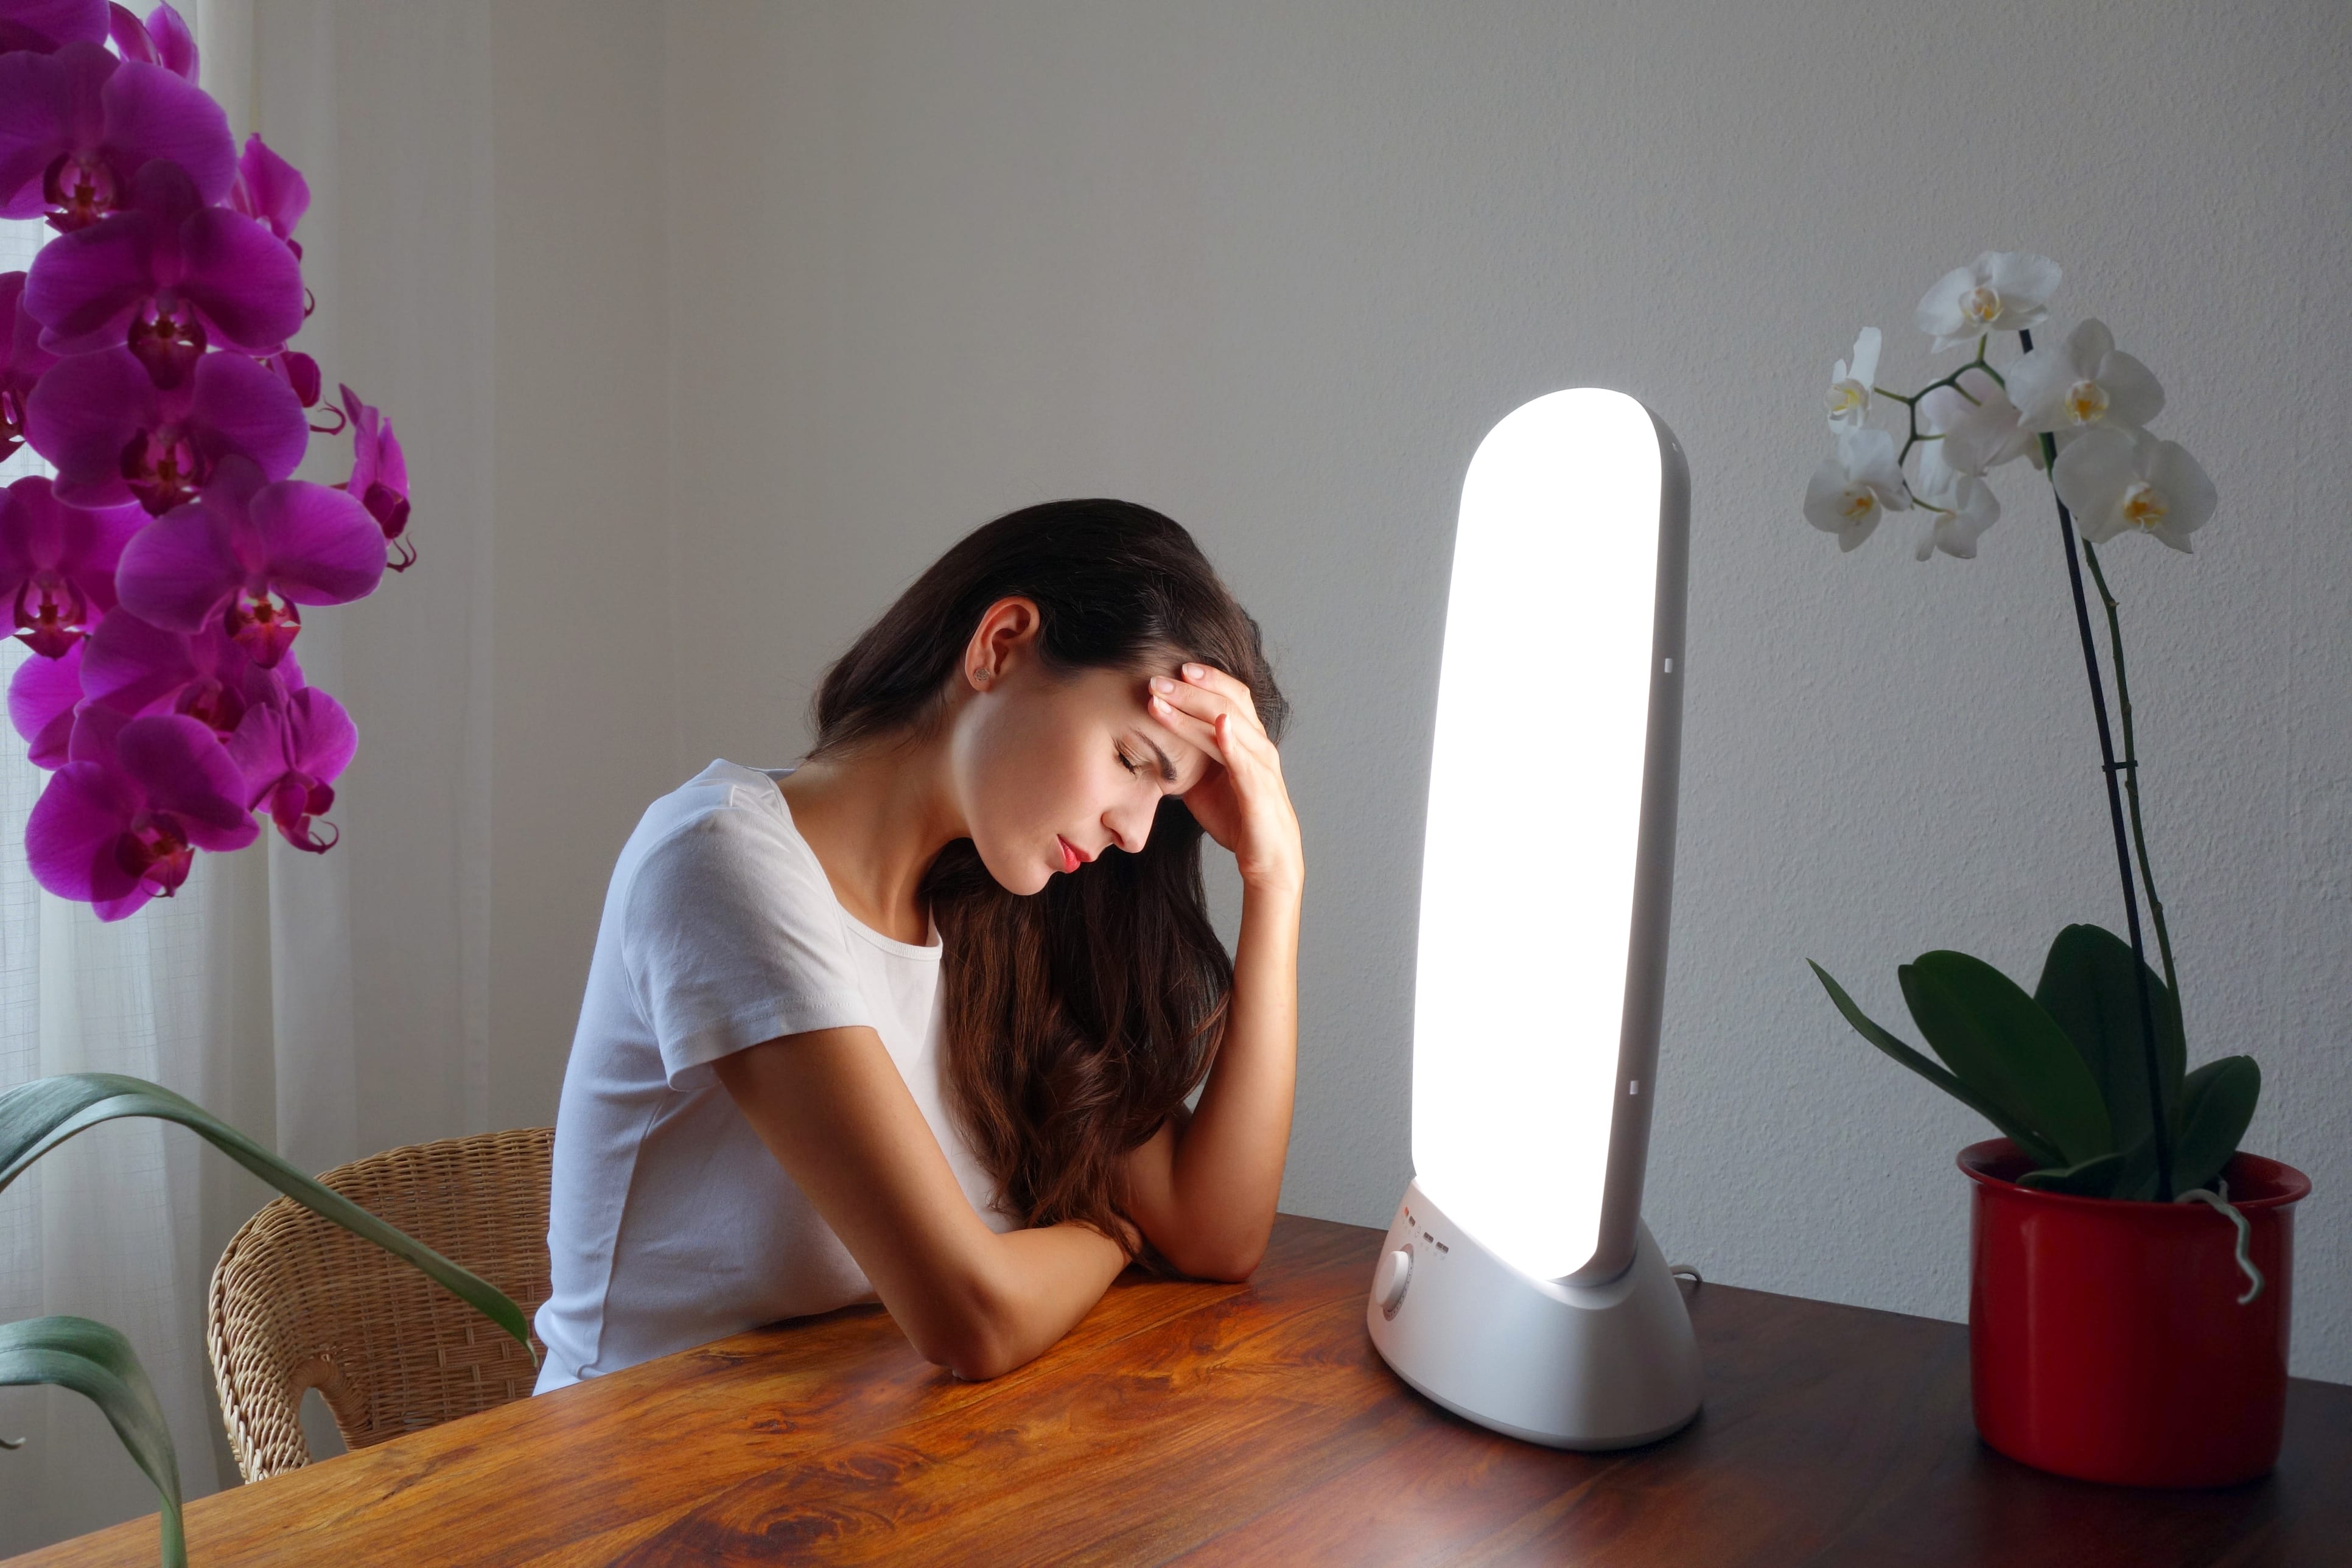 Light therapy against seasonal affective disorder (SAD)